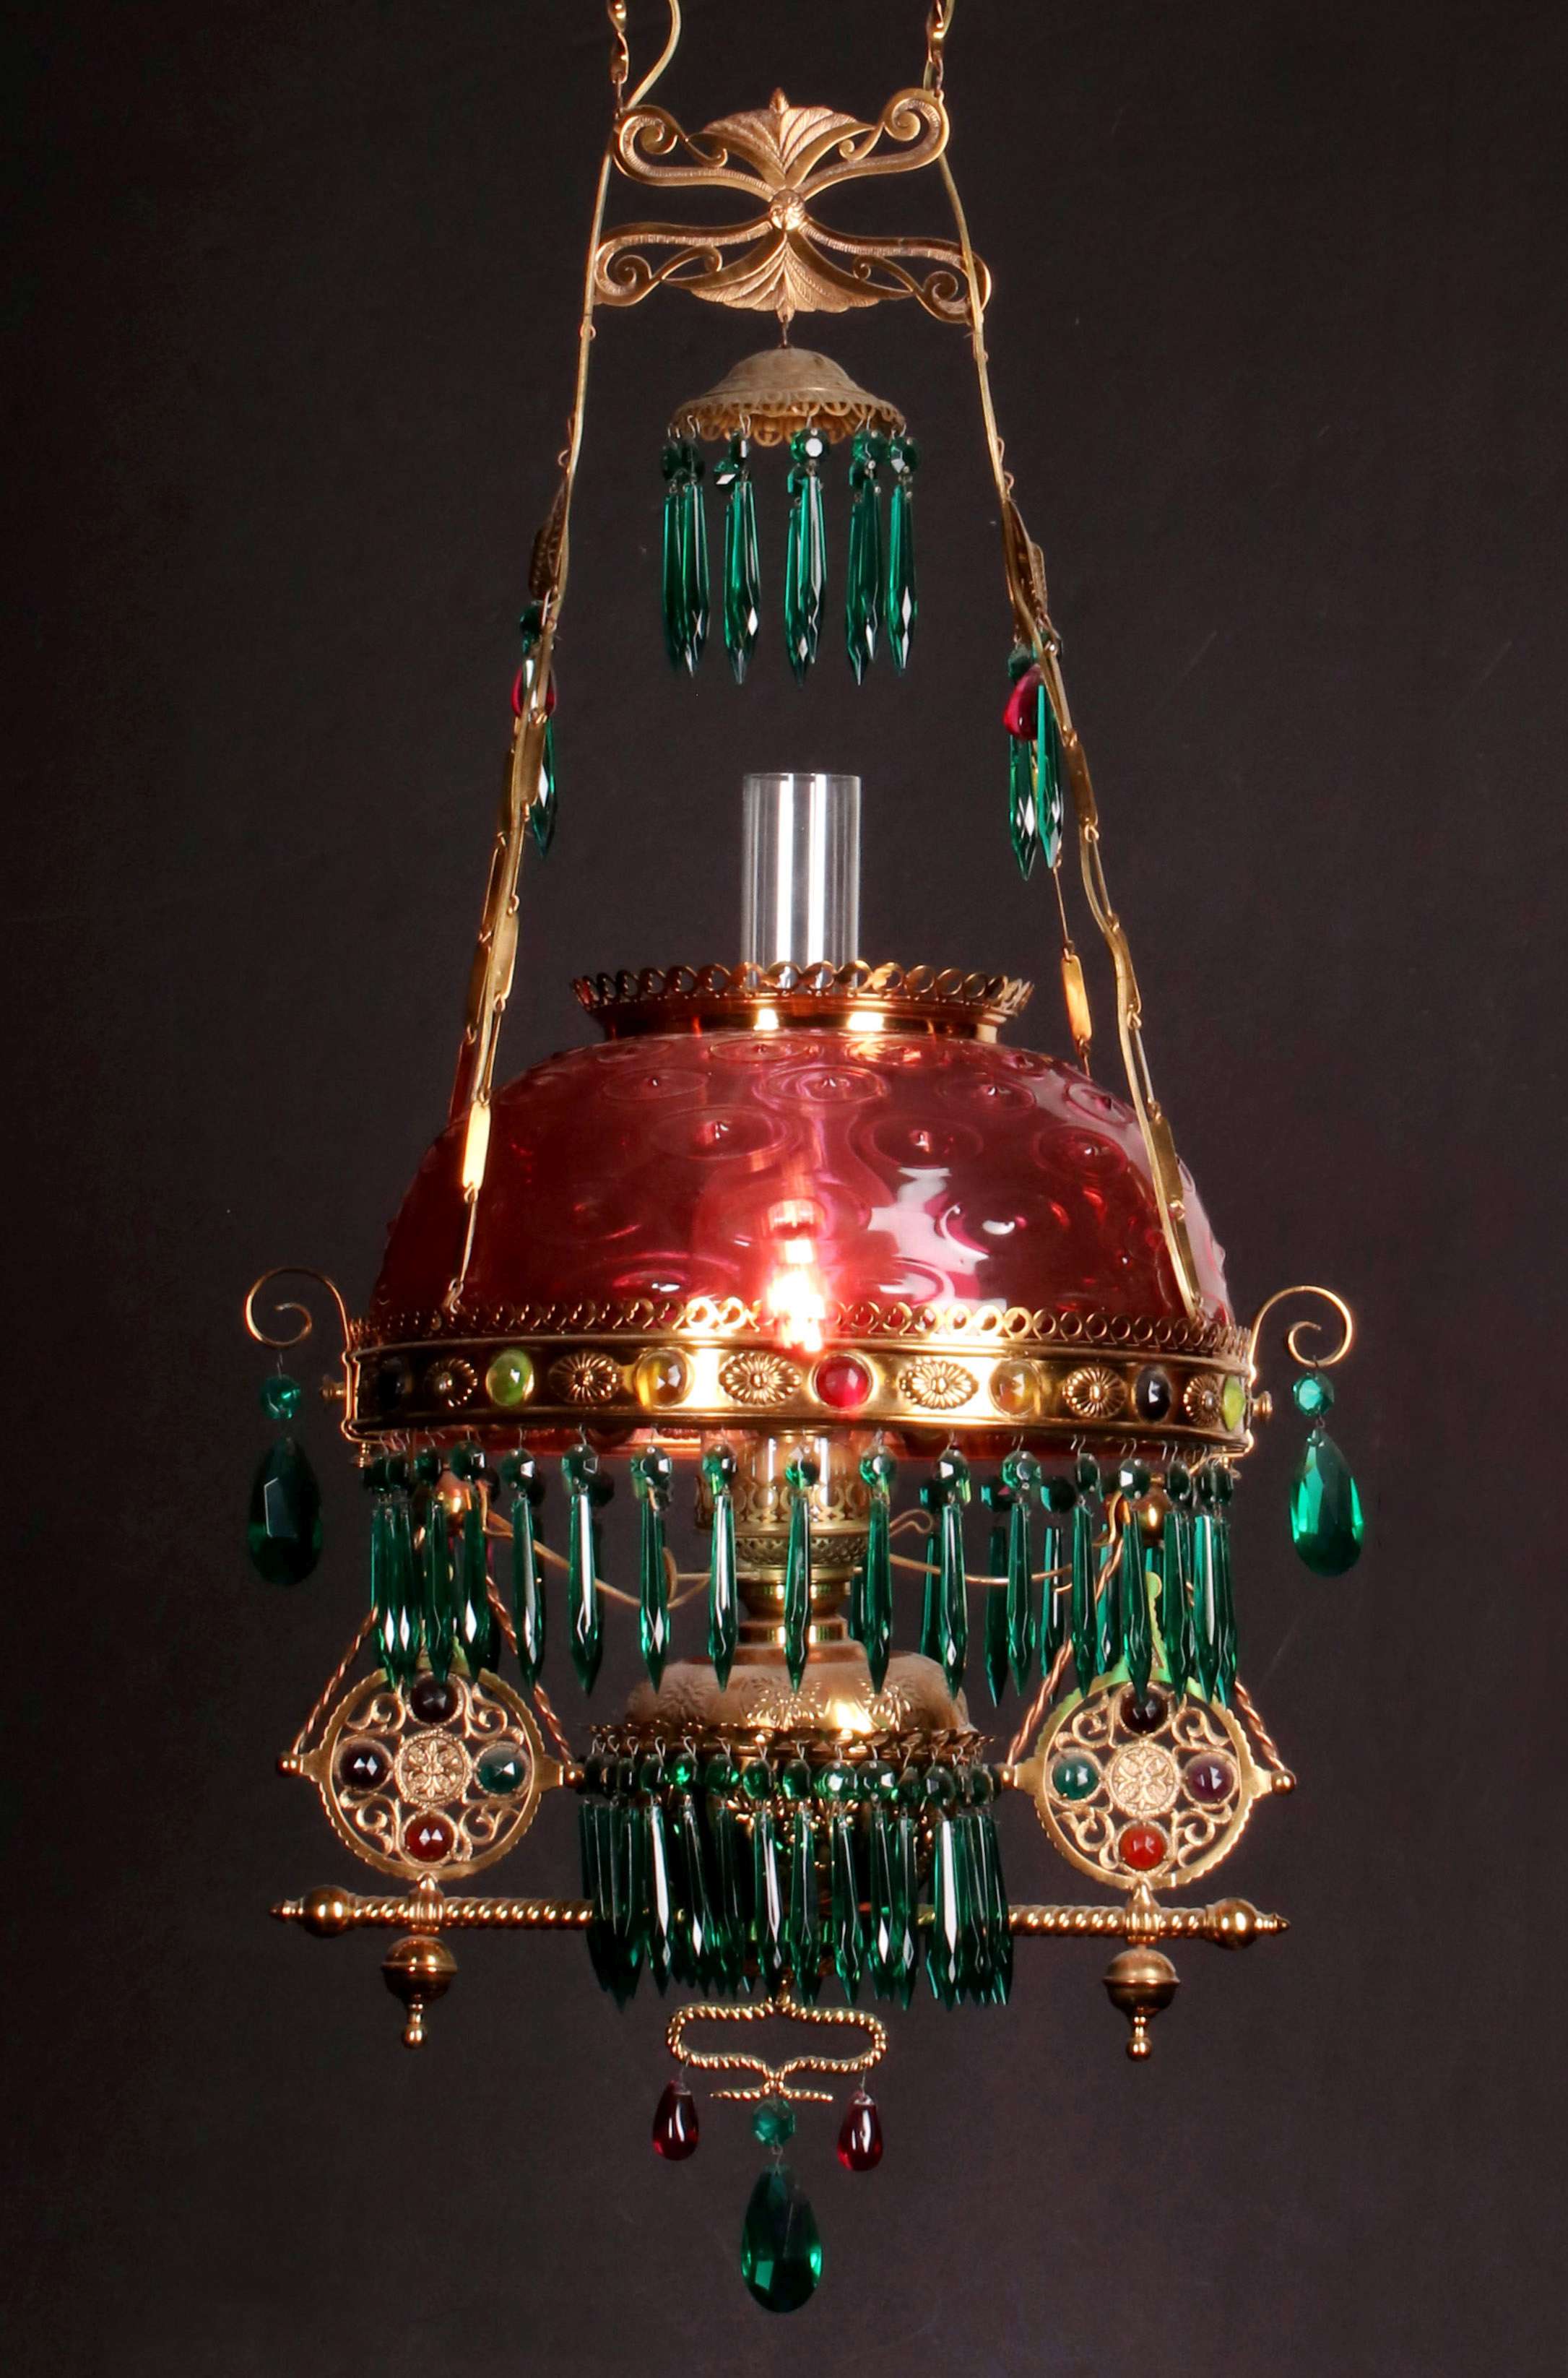 AN EXCEPTIONAL JEWELED BRASS VICTORIAN CHANDELIER